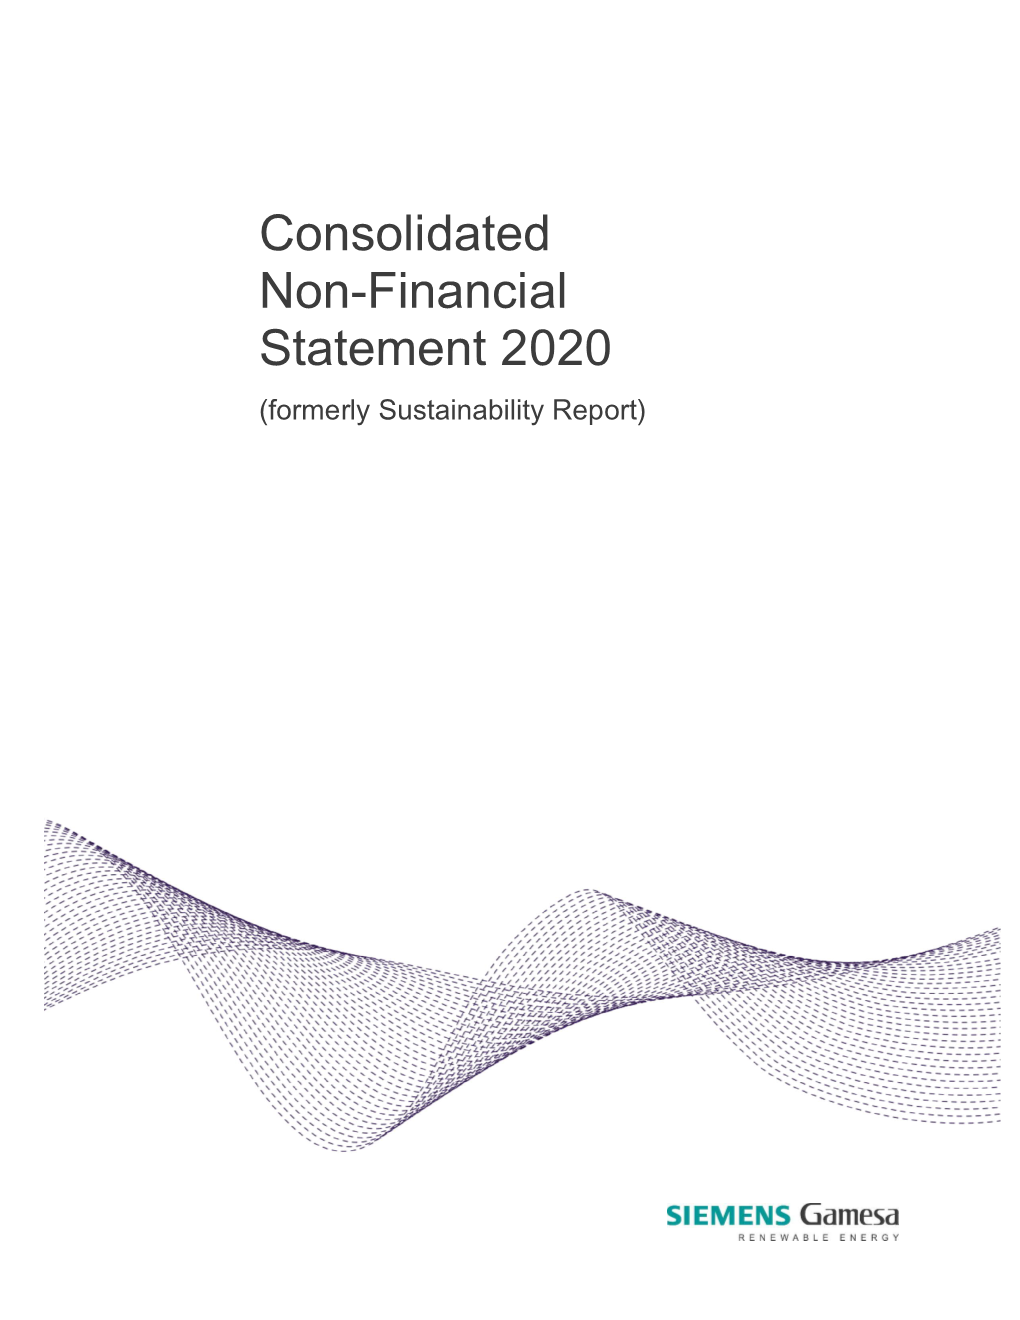 Consolidated Non-Financial Statement 2020 (Formerly Sustainability Report) Highlights